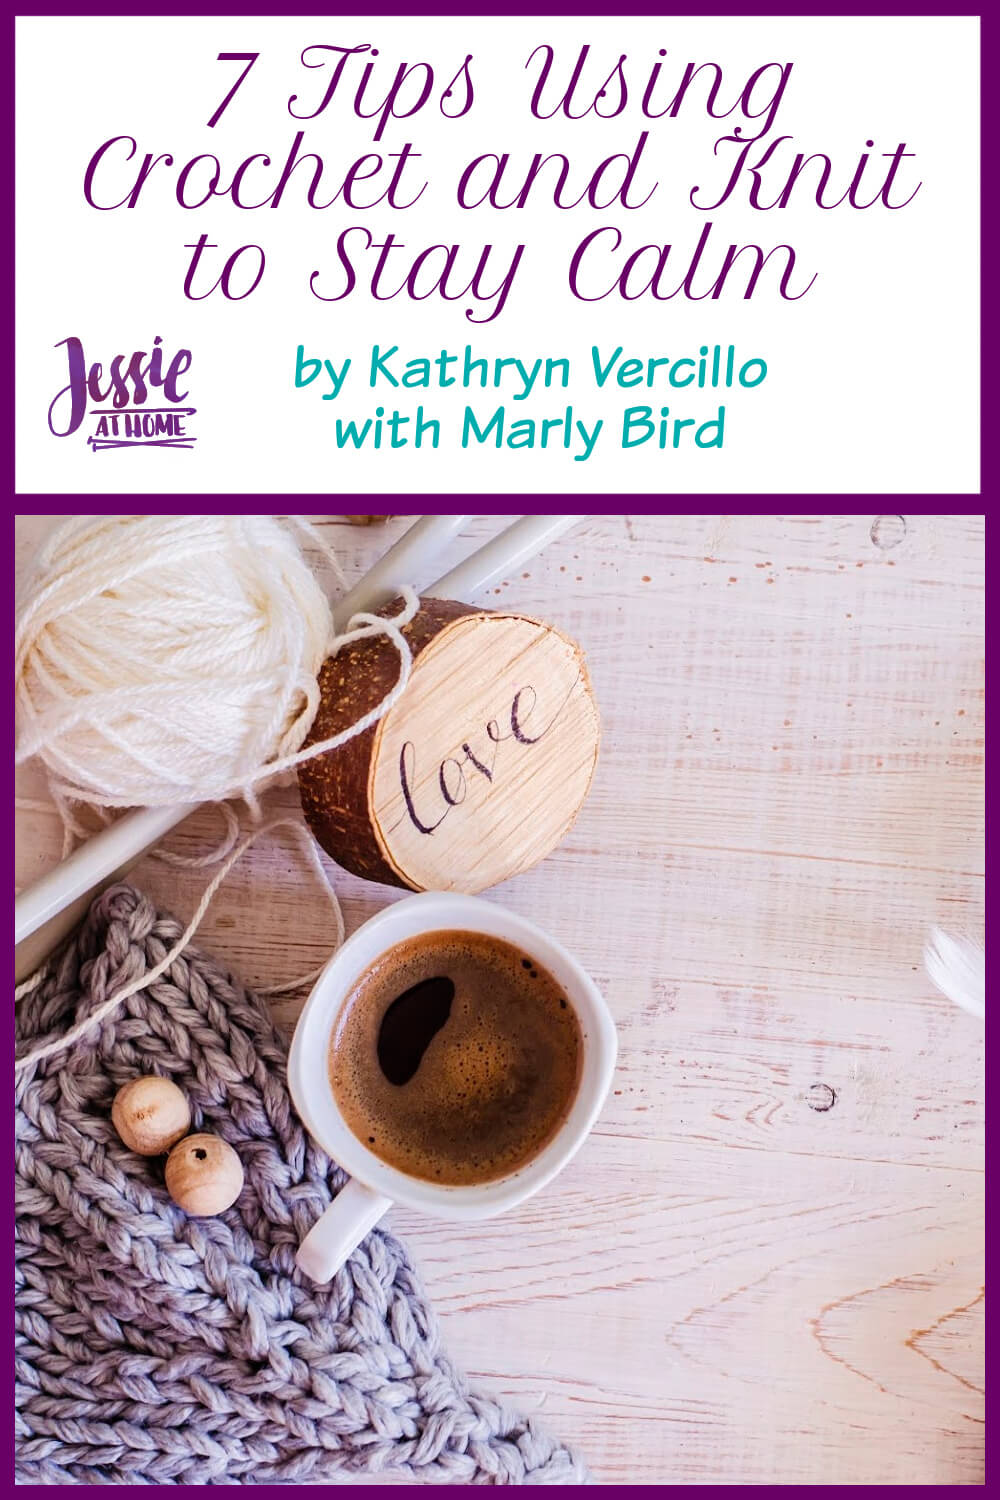 7 Tips for Using Crochet and Knitting to Stay Calm and Centered This Holiday Season